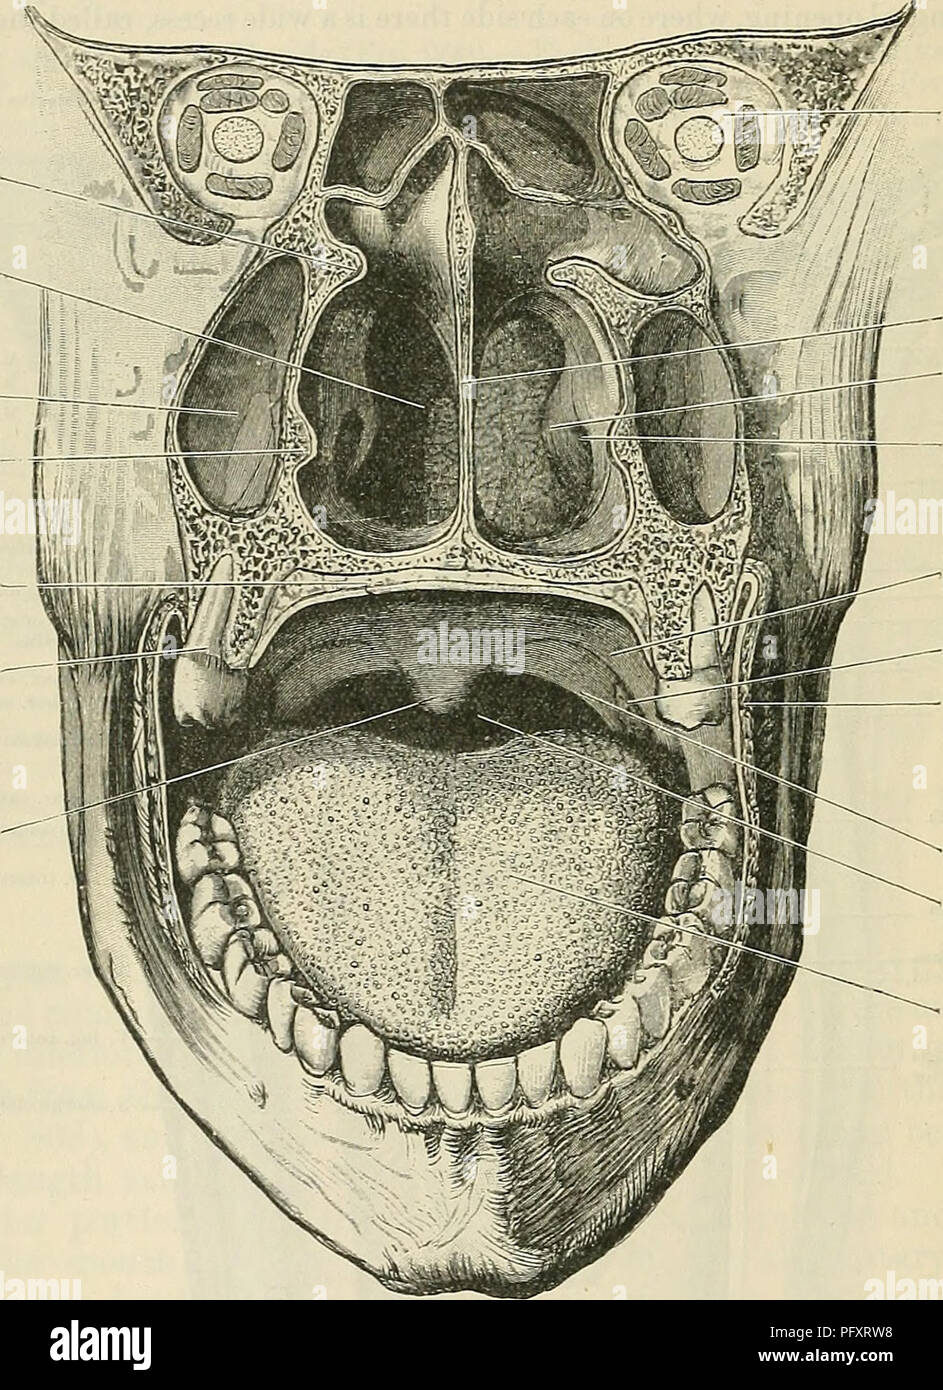 File:Antero-posterior section shape of cavities with and without